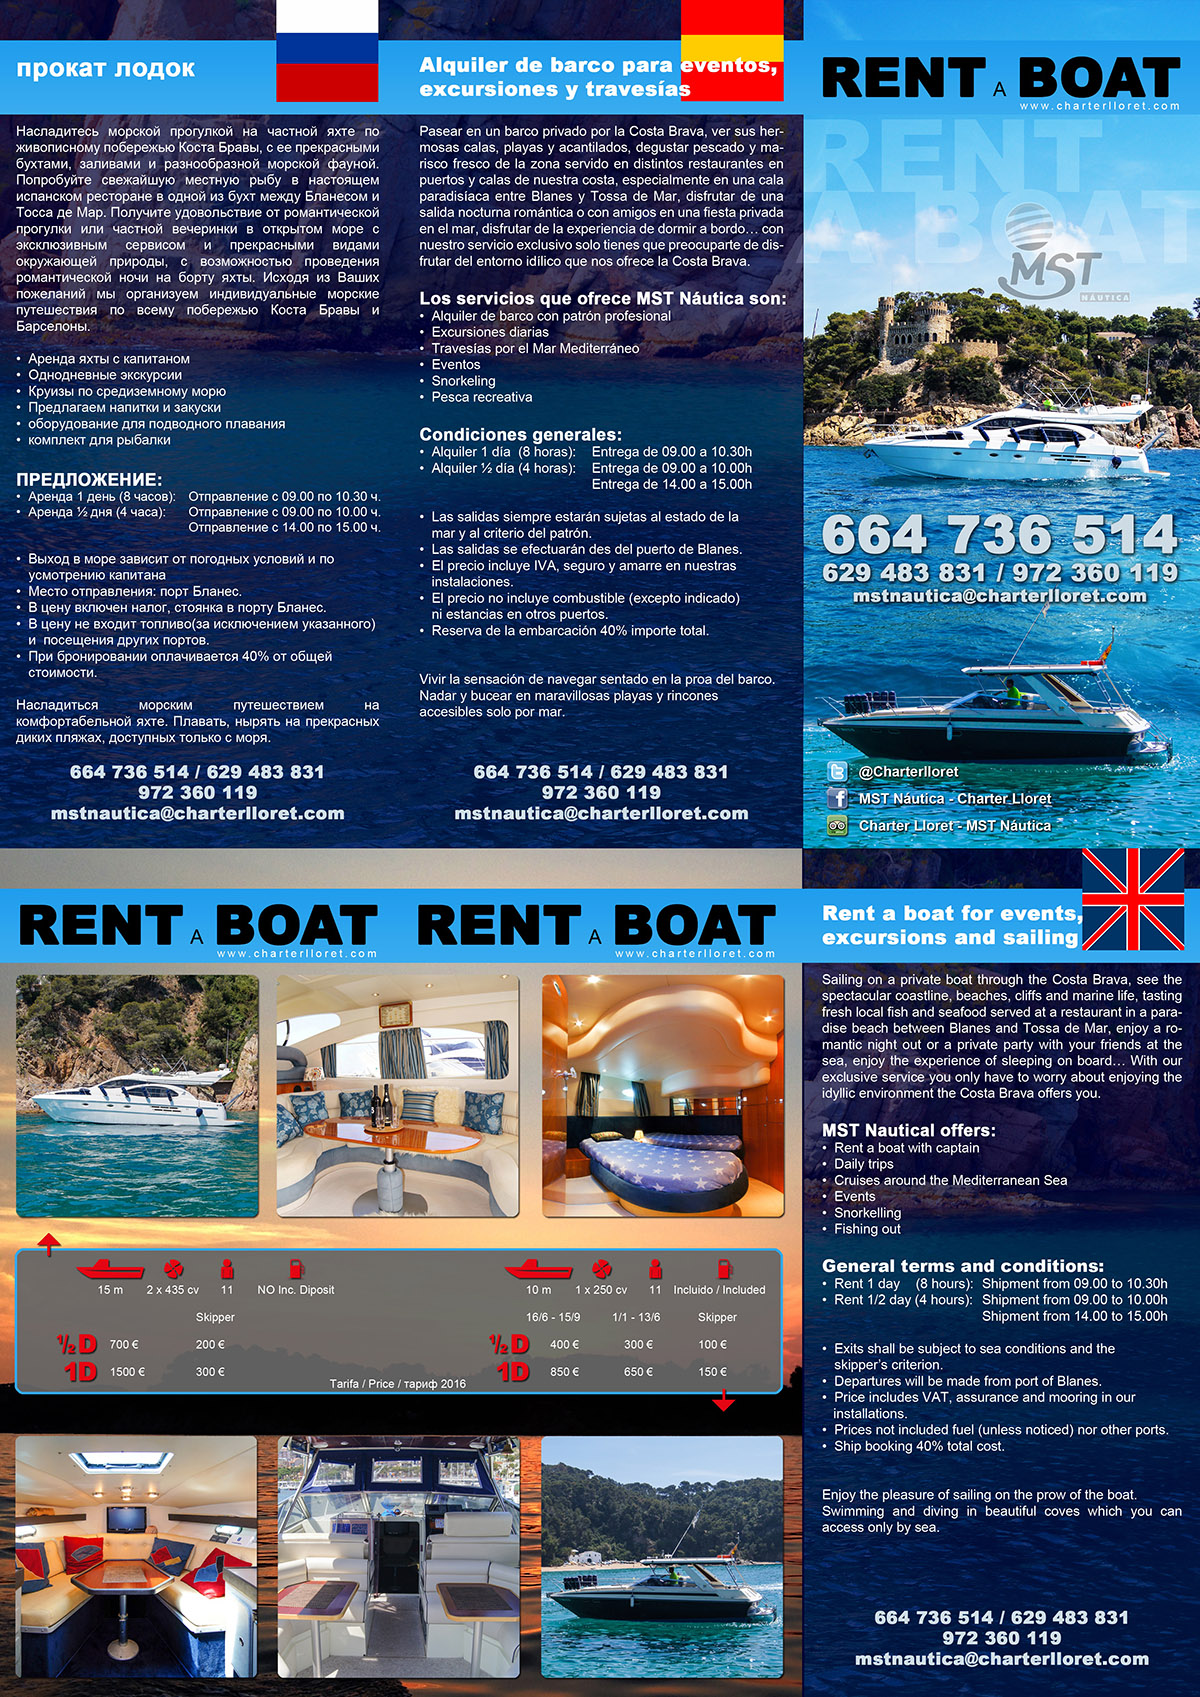 Other motor boats (Blanes)